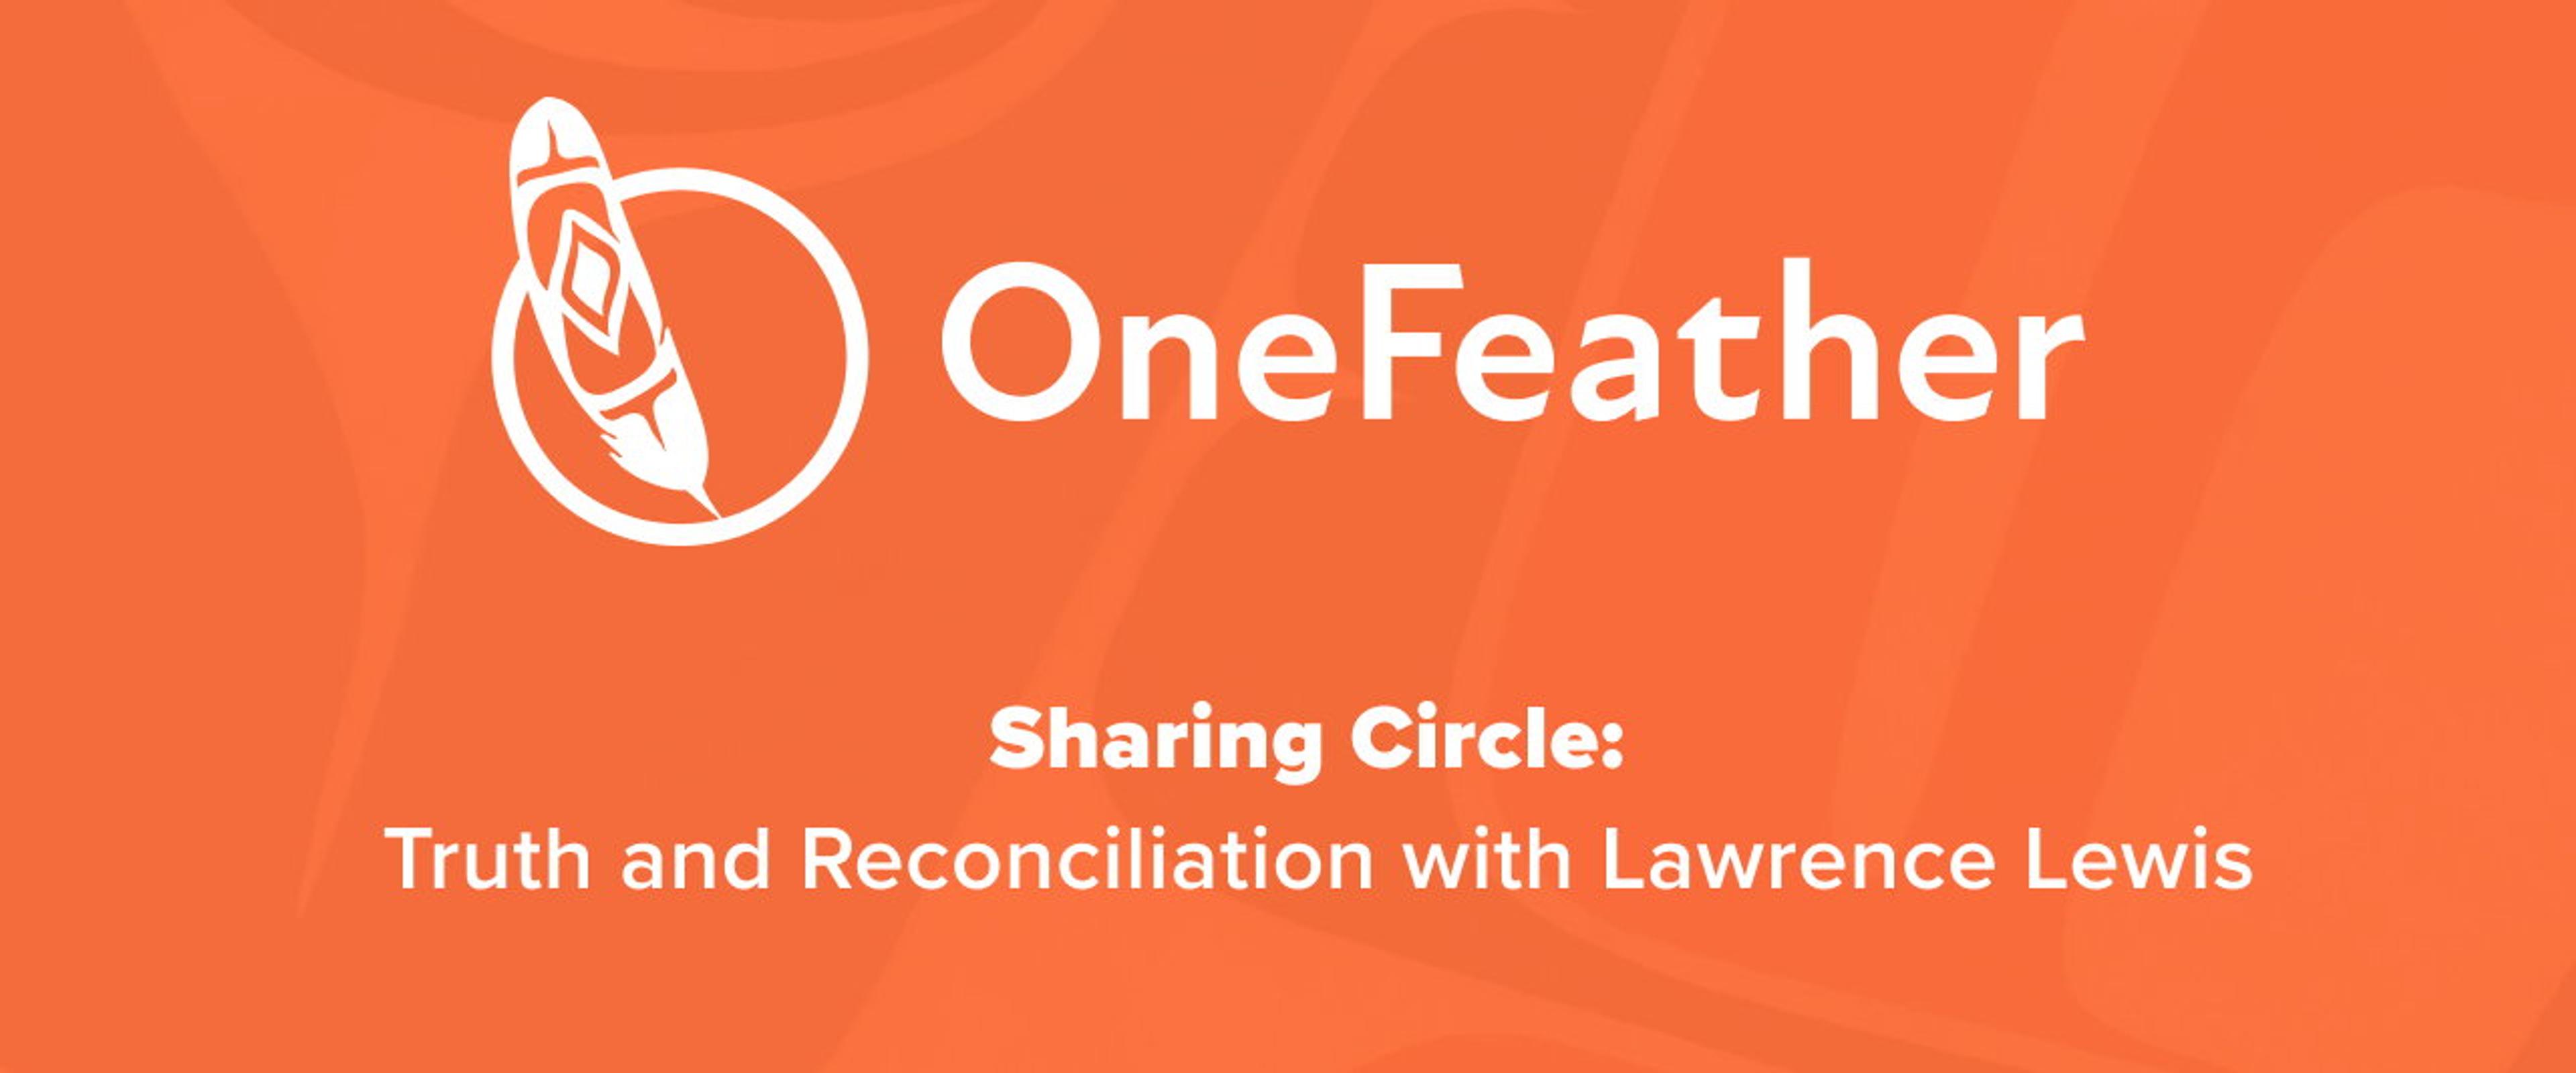 Cover Image for Truth and Reconciliation: We Pause, Reflect, and Share a Word of Hope